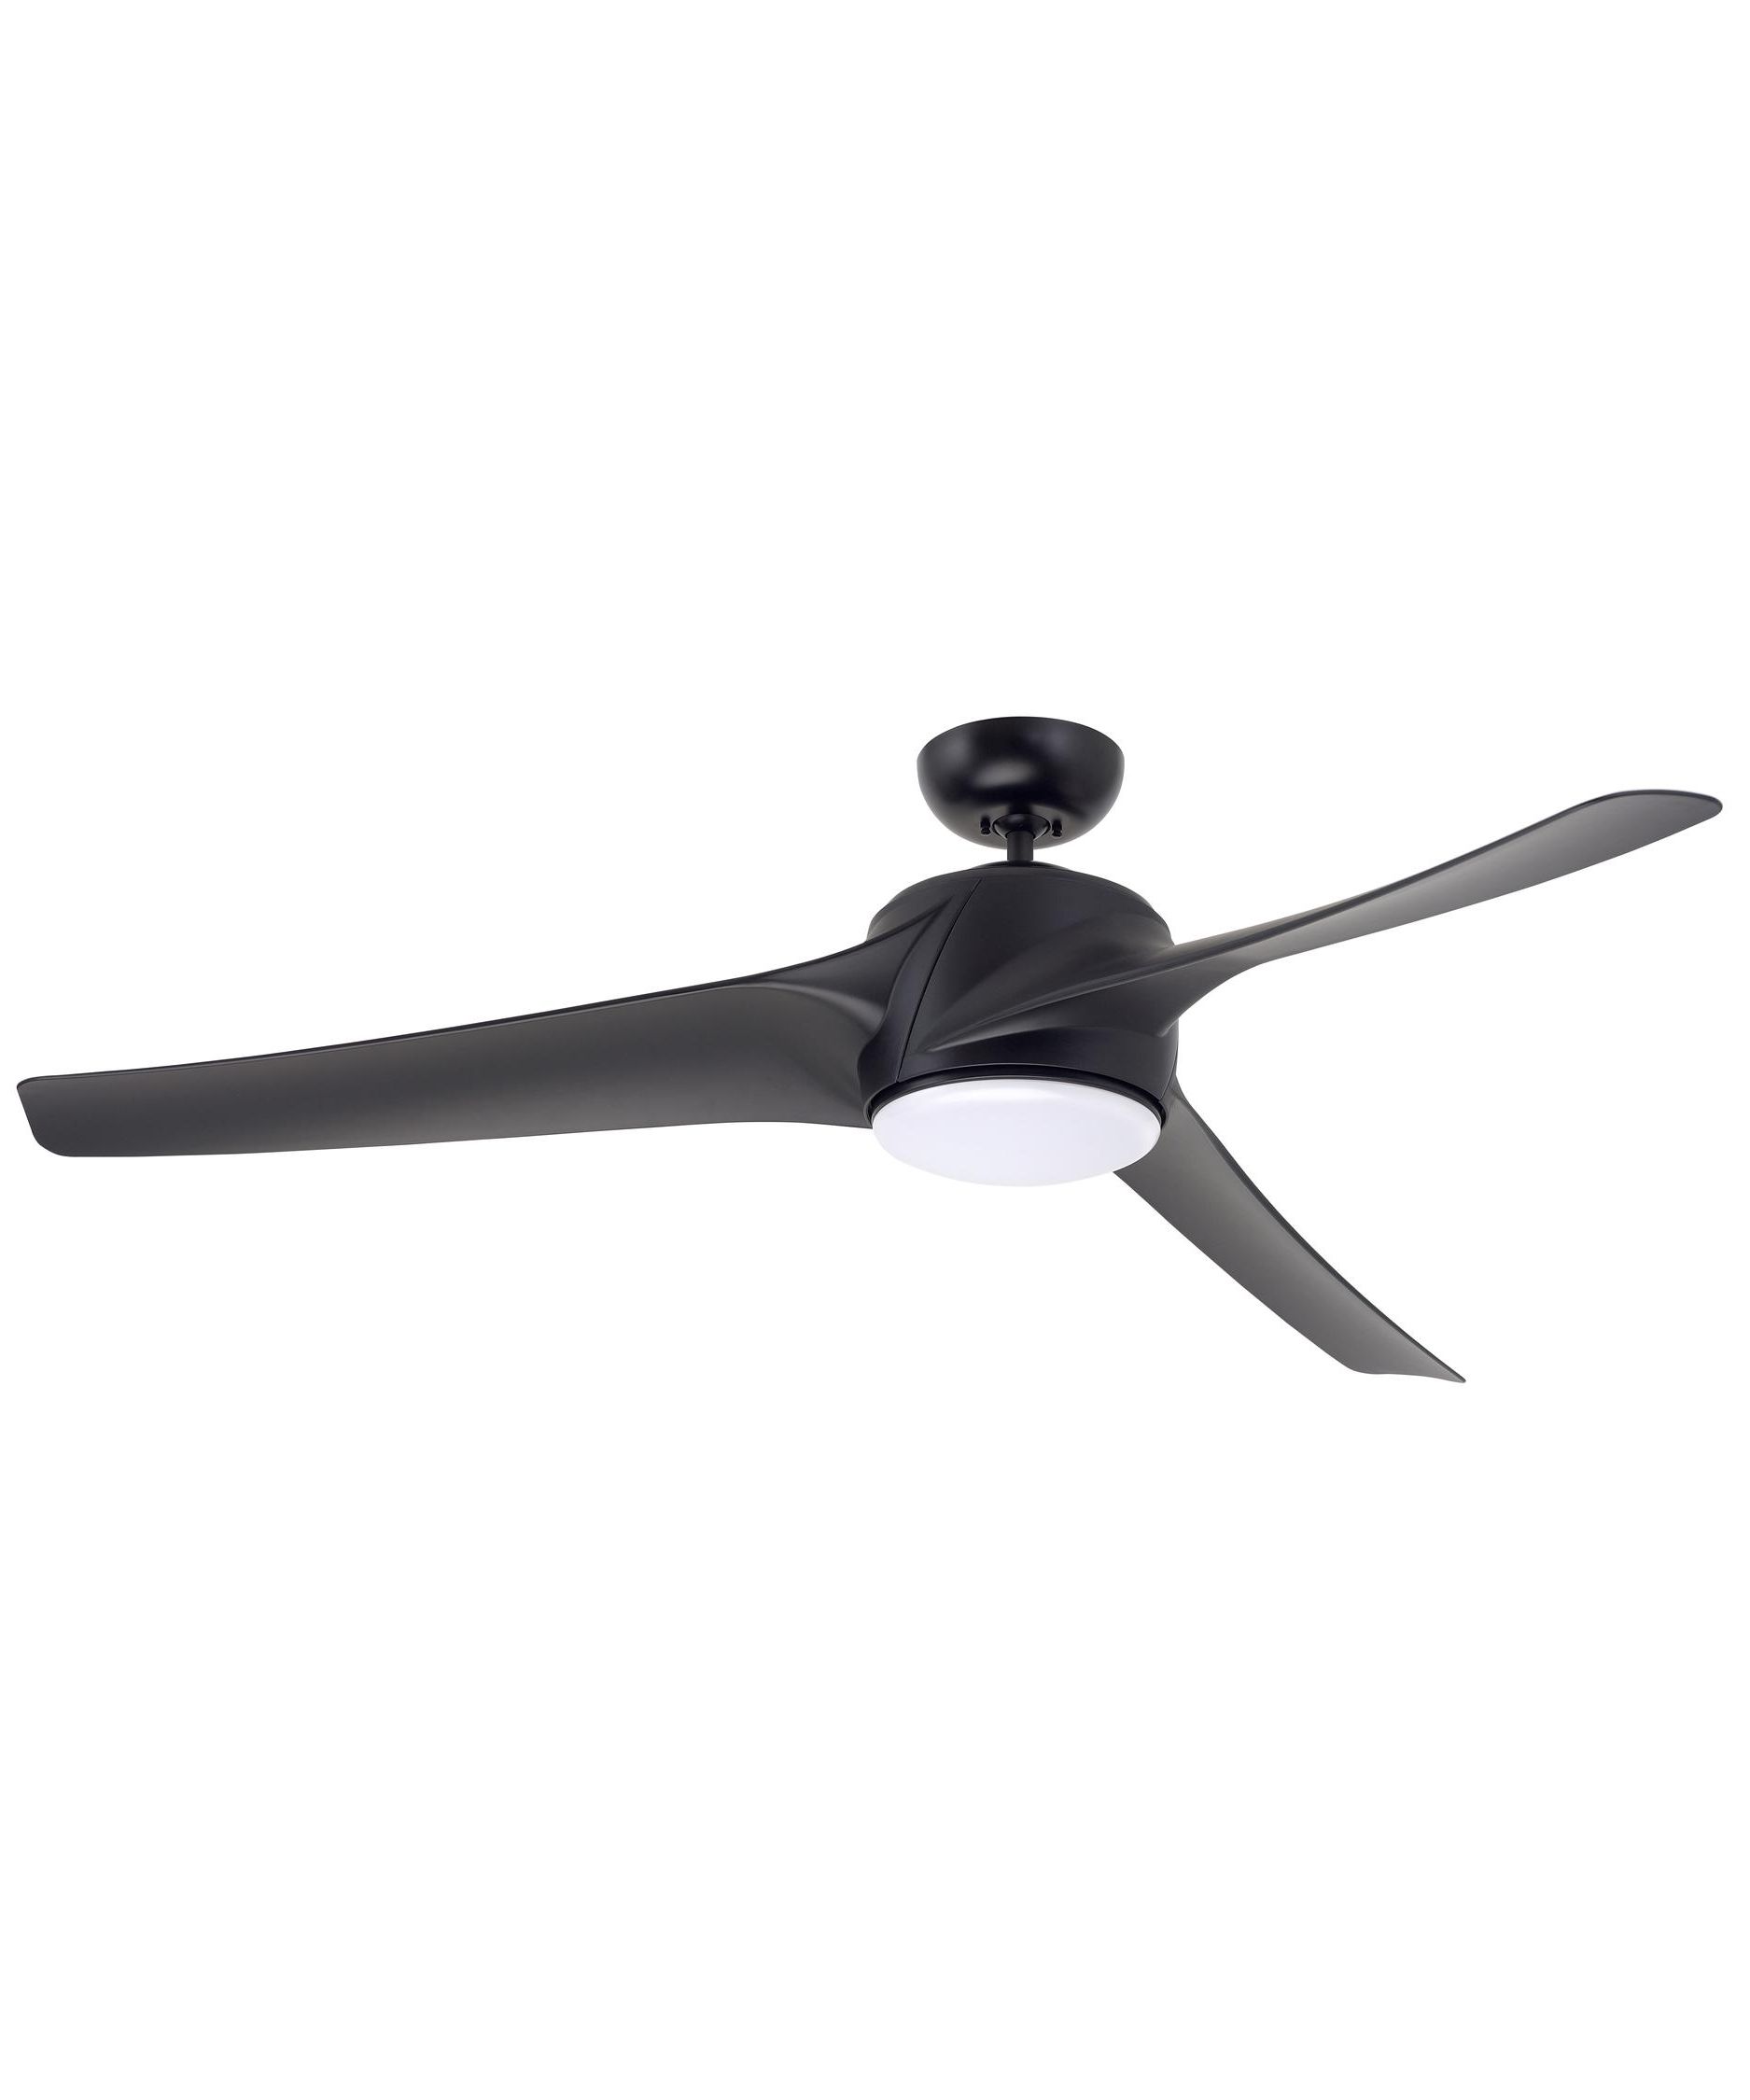 60 Inch Outdoor Ceiling Fans With Lights Pertaining To Well Liked Emerson Cf860 Luray Eco 60 Inch 3 Blade Ceiling Fan (View 18 of 20)